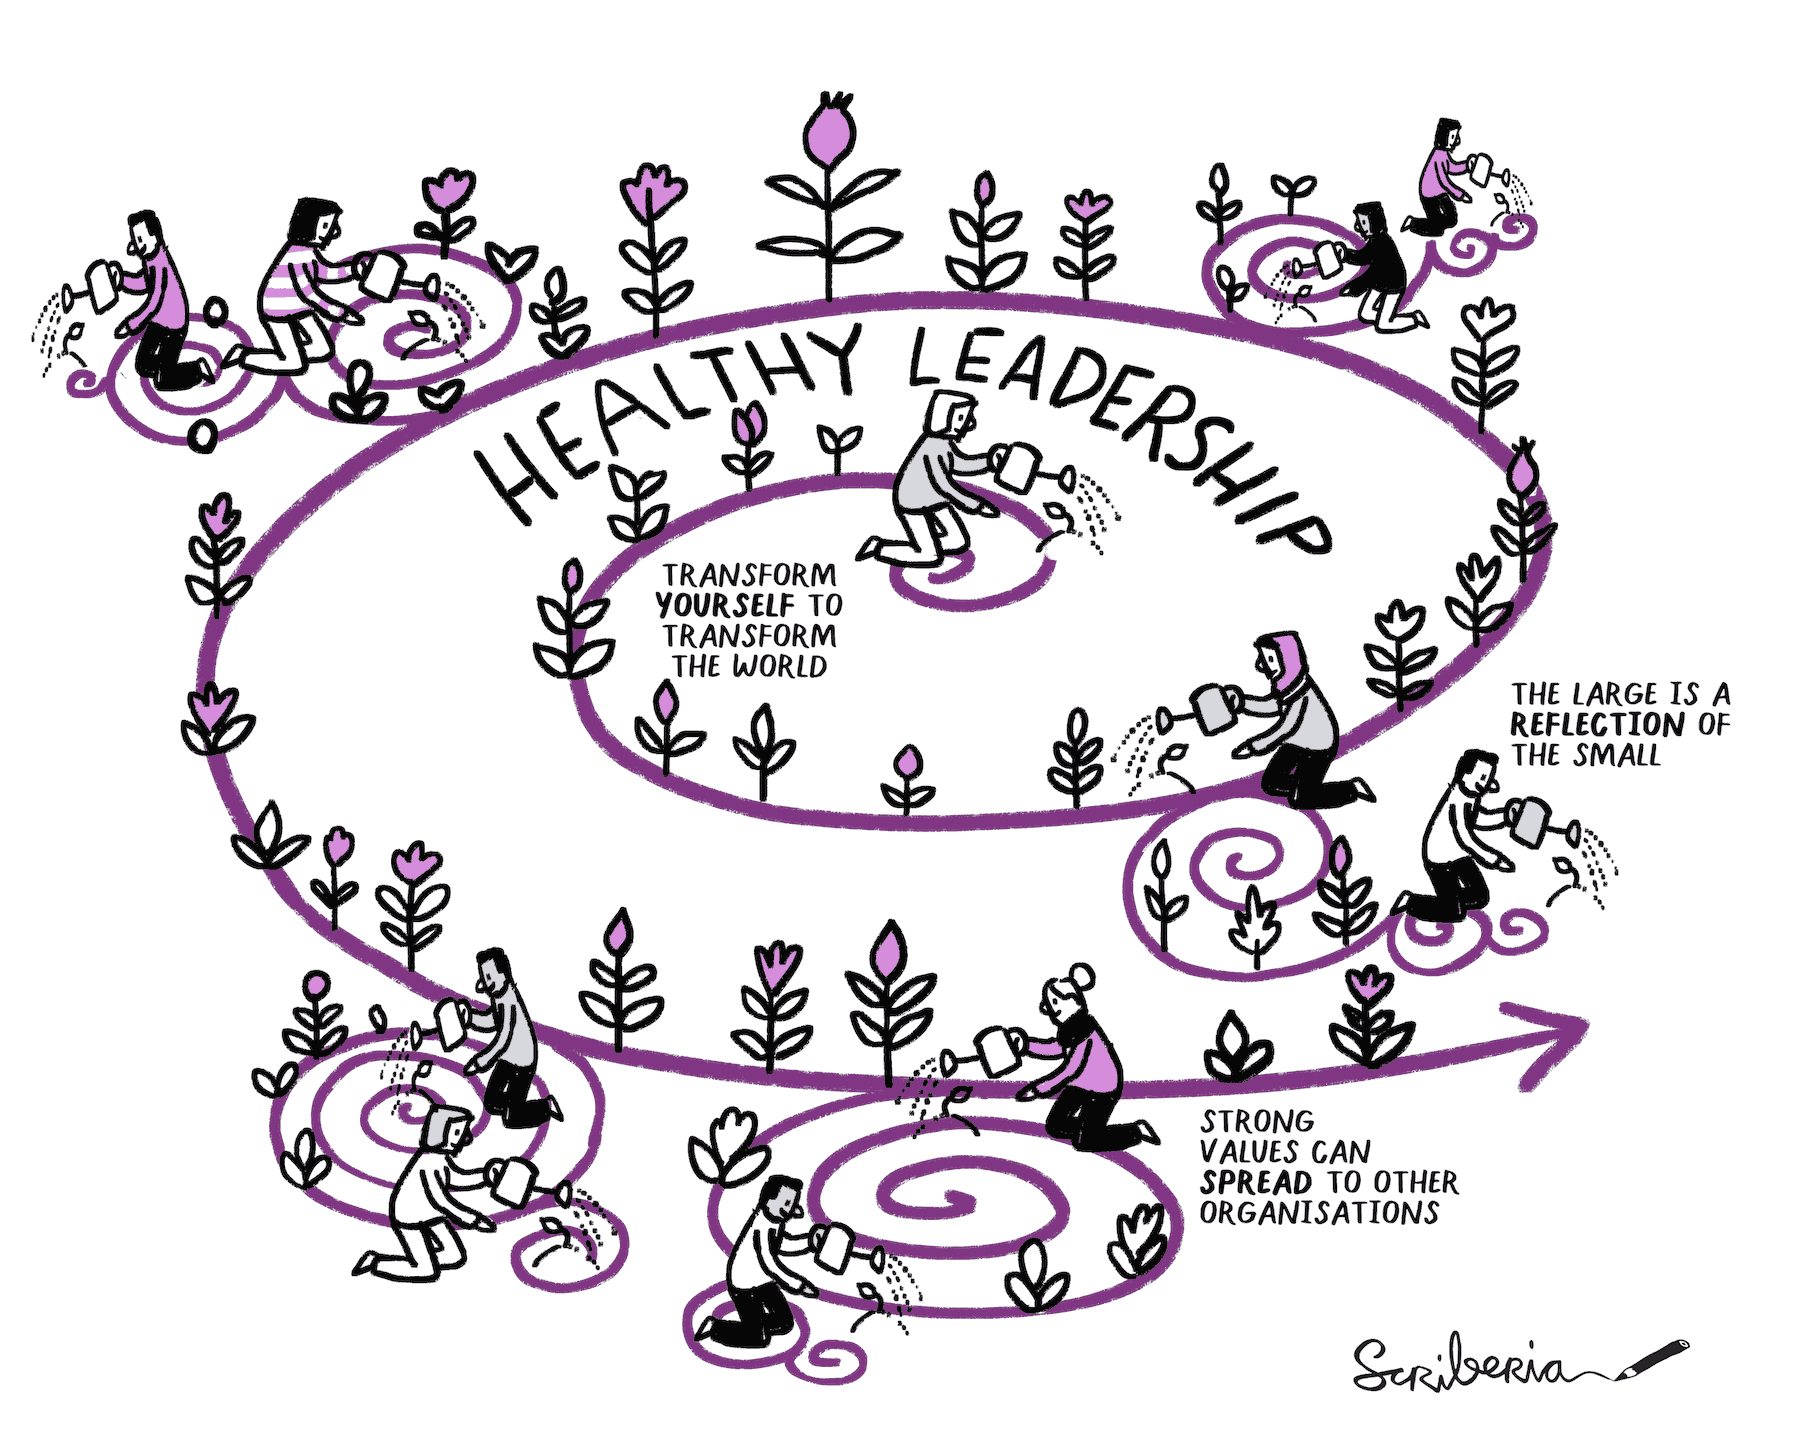 Leadership is illustrated as a fractal where different people are watering and growing flowers in different places - that is leading to new fractals with more people. There are a few quotes written on the image - Transform yourself to transform the world, the large is a reflection of the small, and strong values can spread to other organisations.